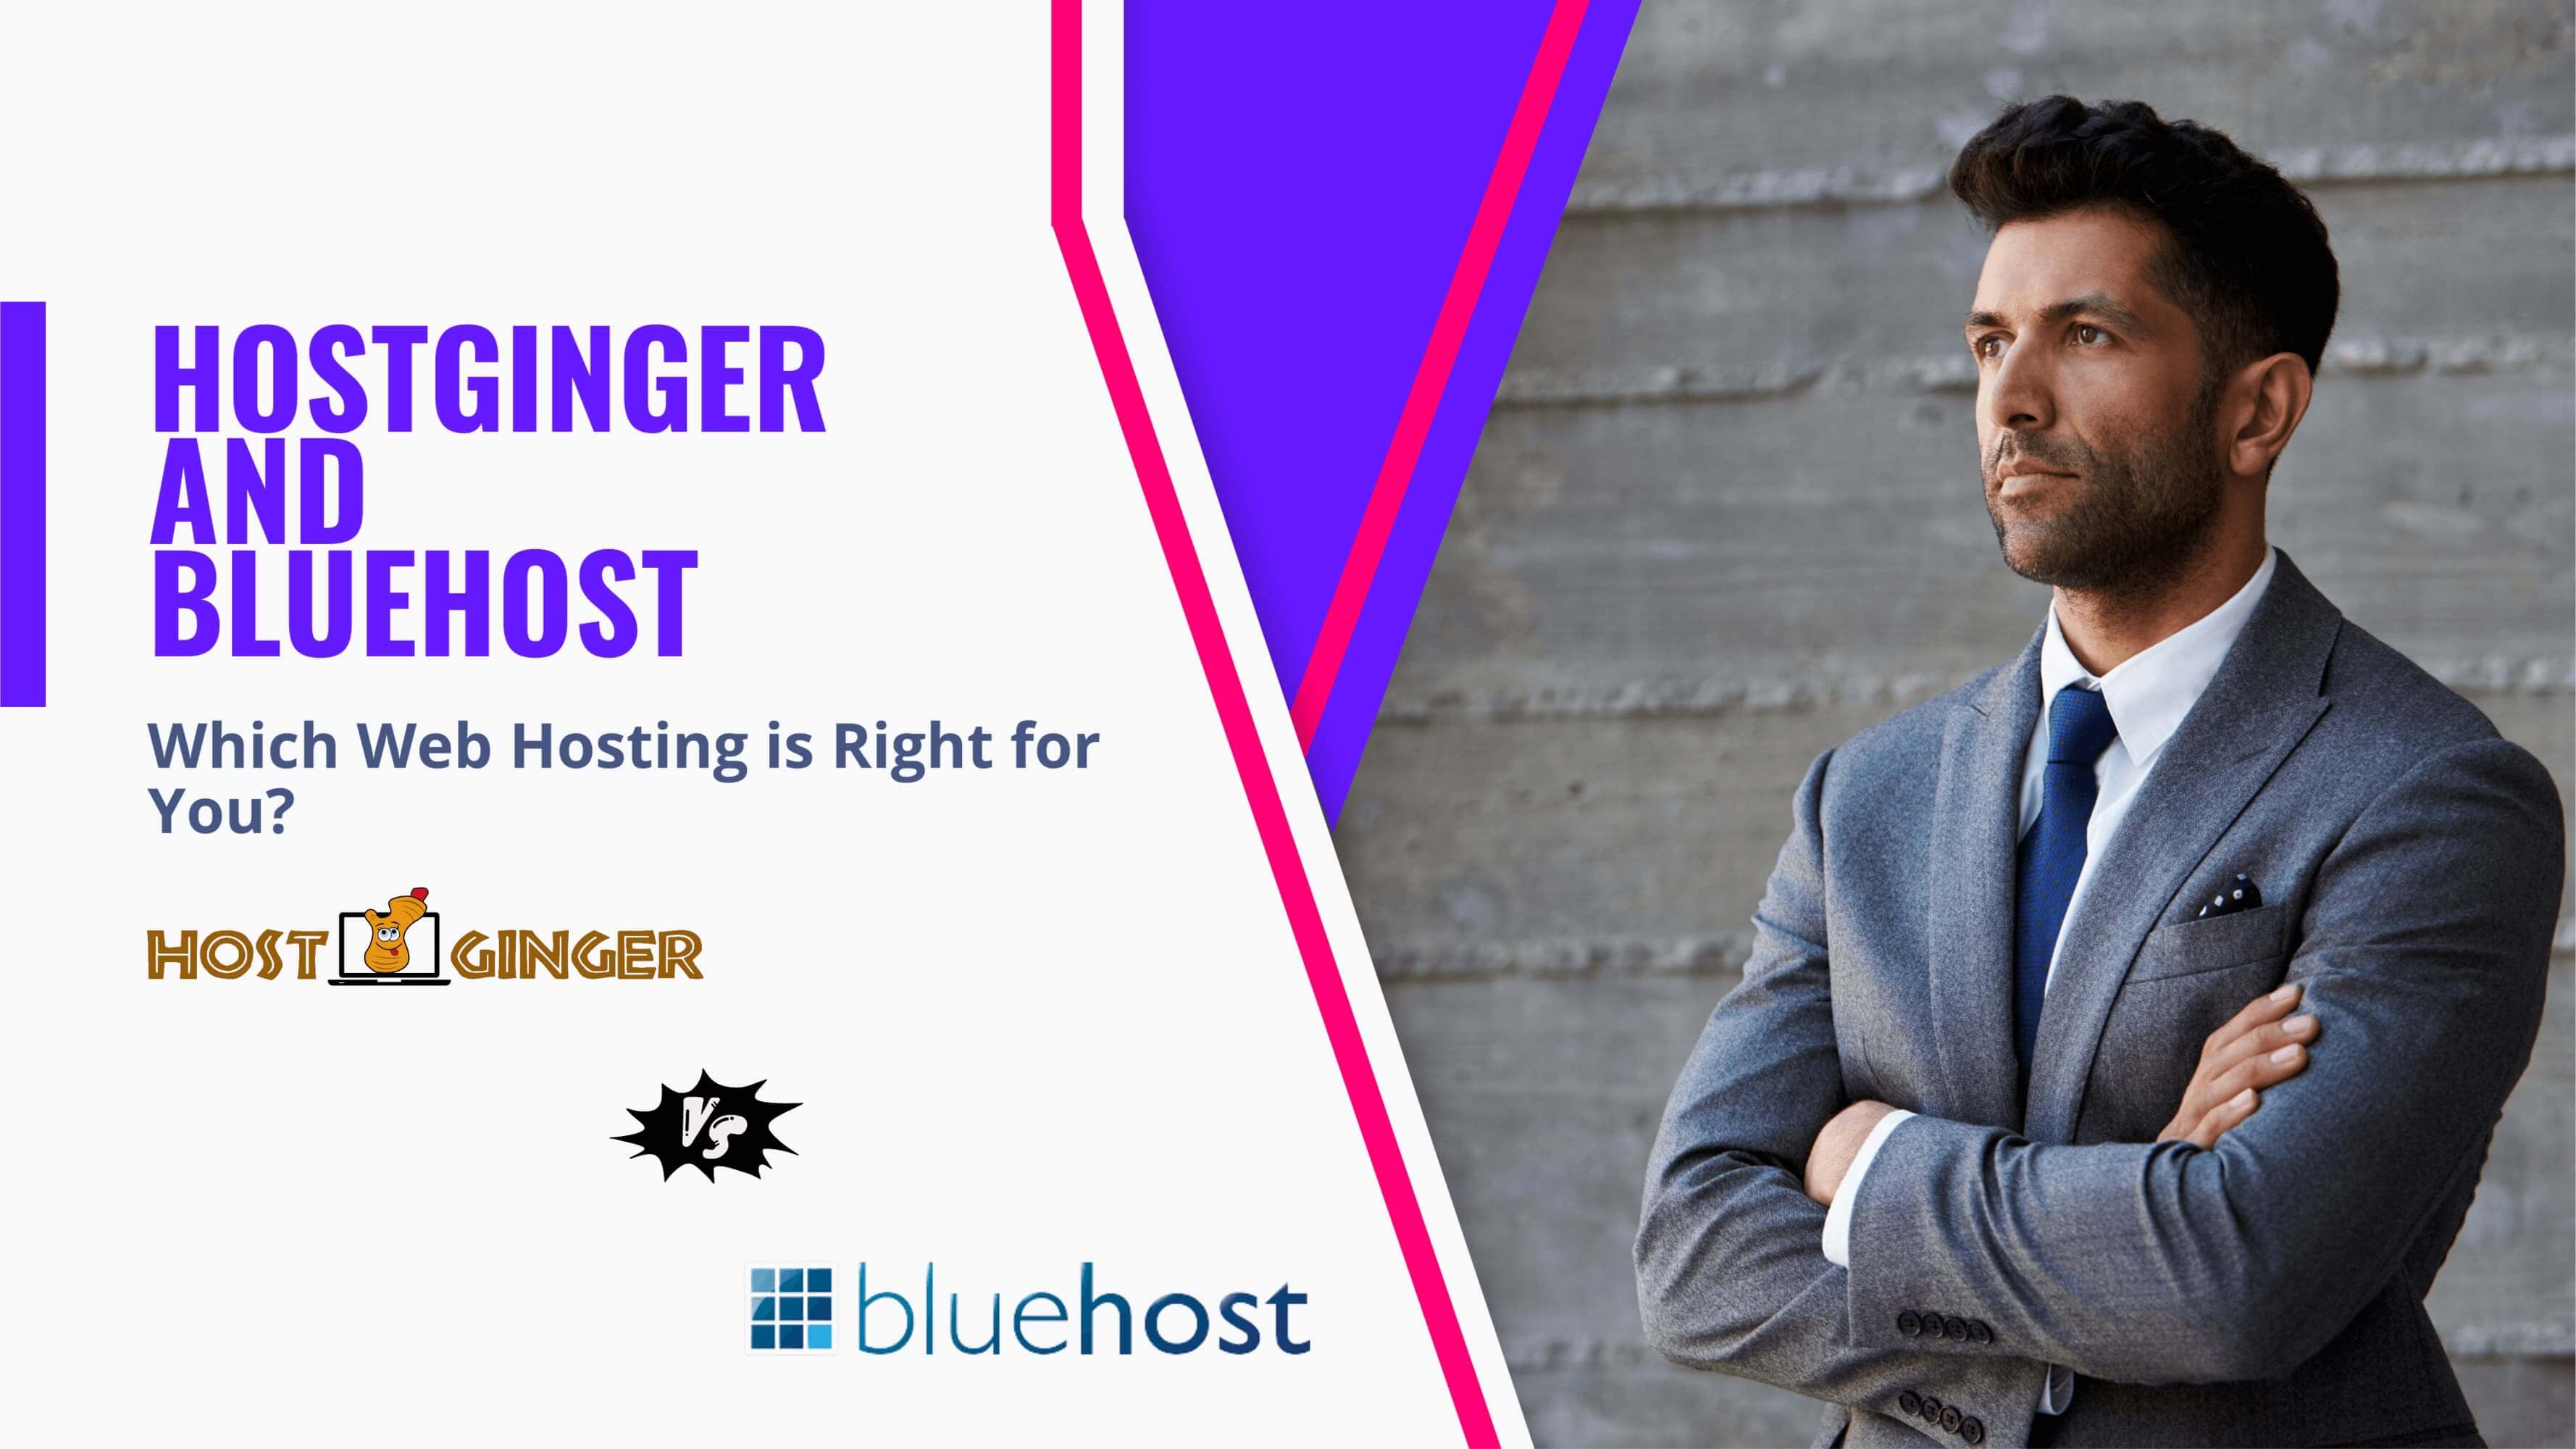 Comparing Hostginger and Bluehost